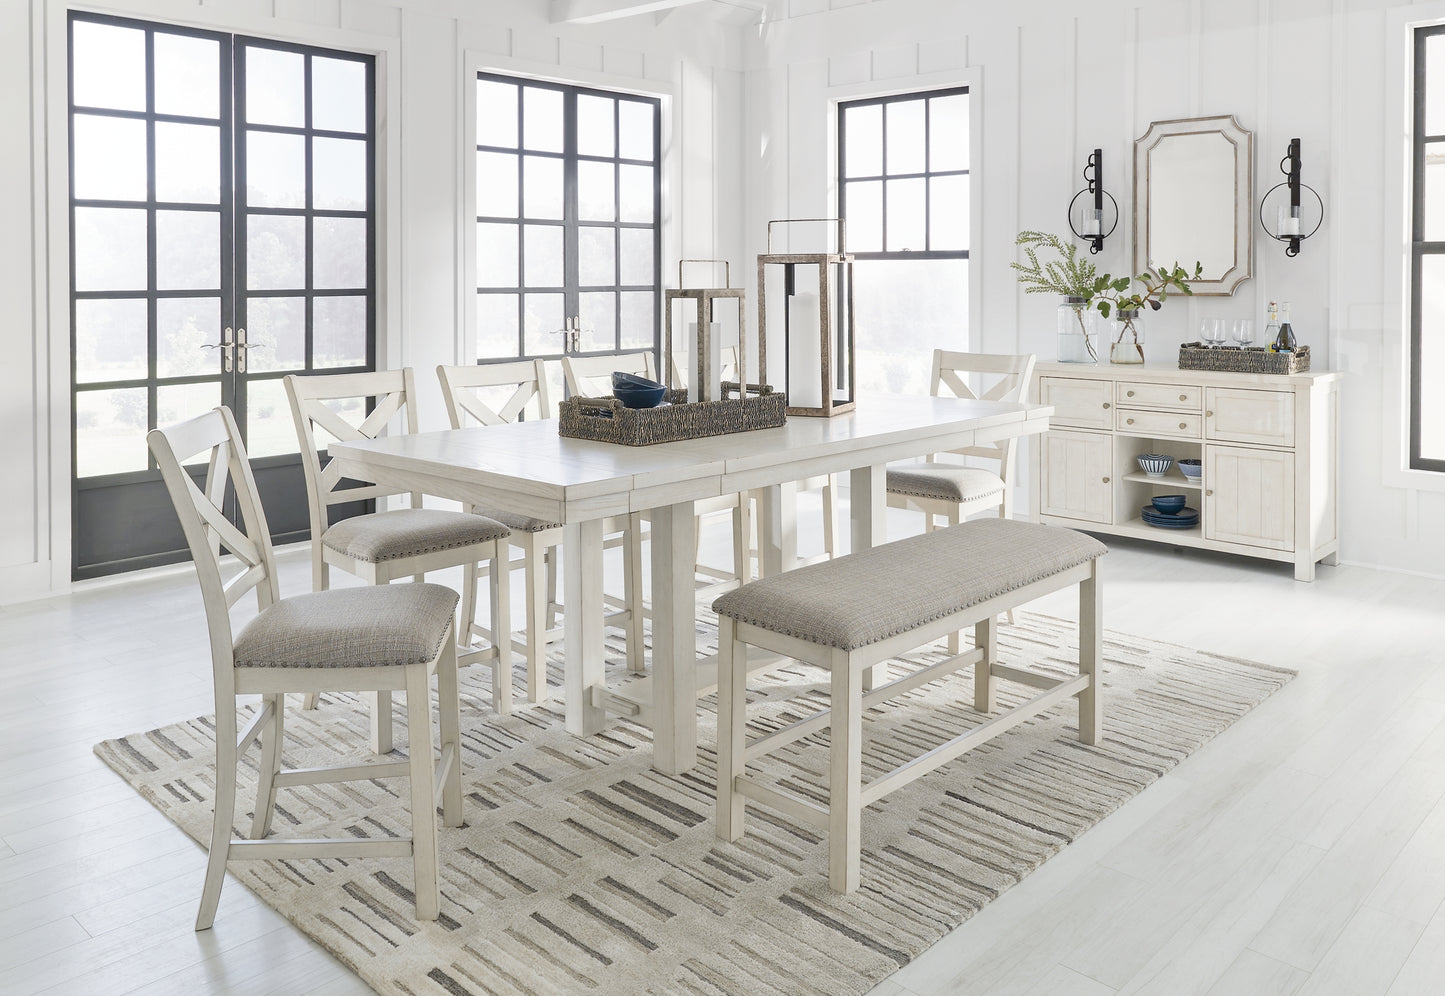 Robbinsdale Counter Height Dining Table and 6 Barstools and Bench Signature Design by Ashley®